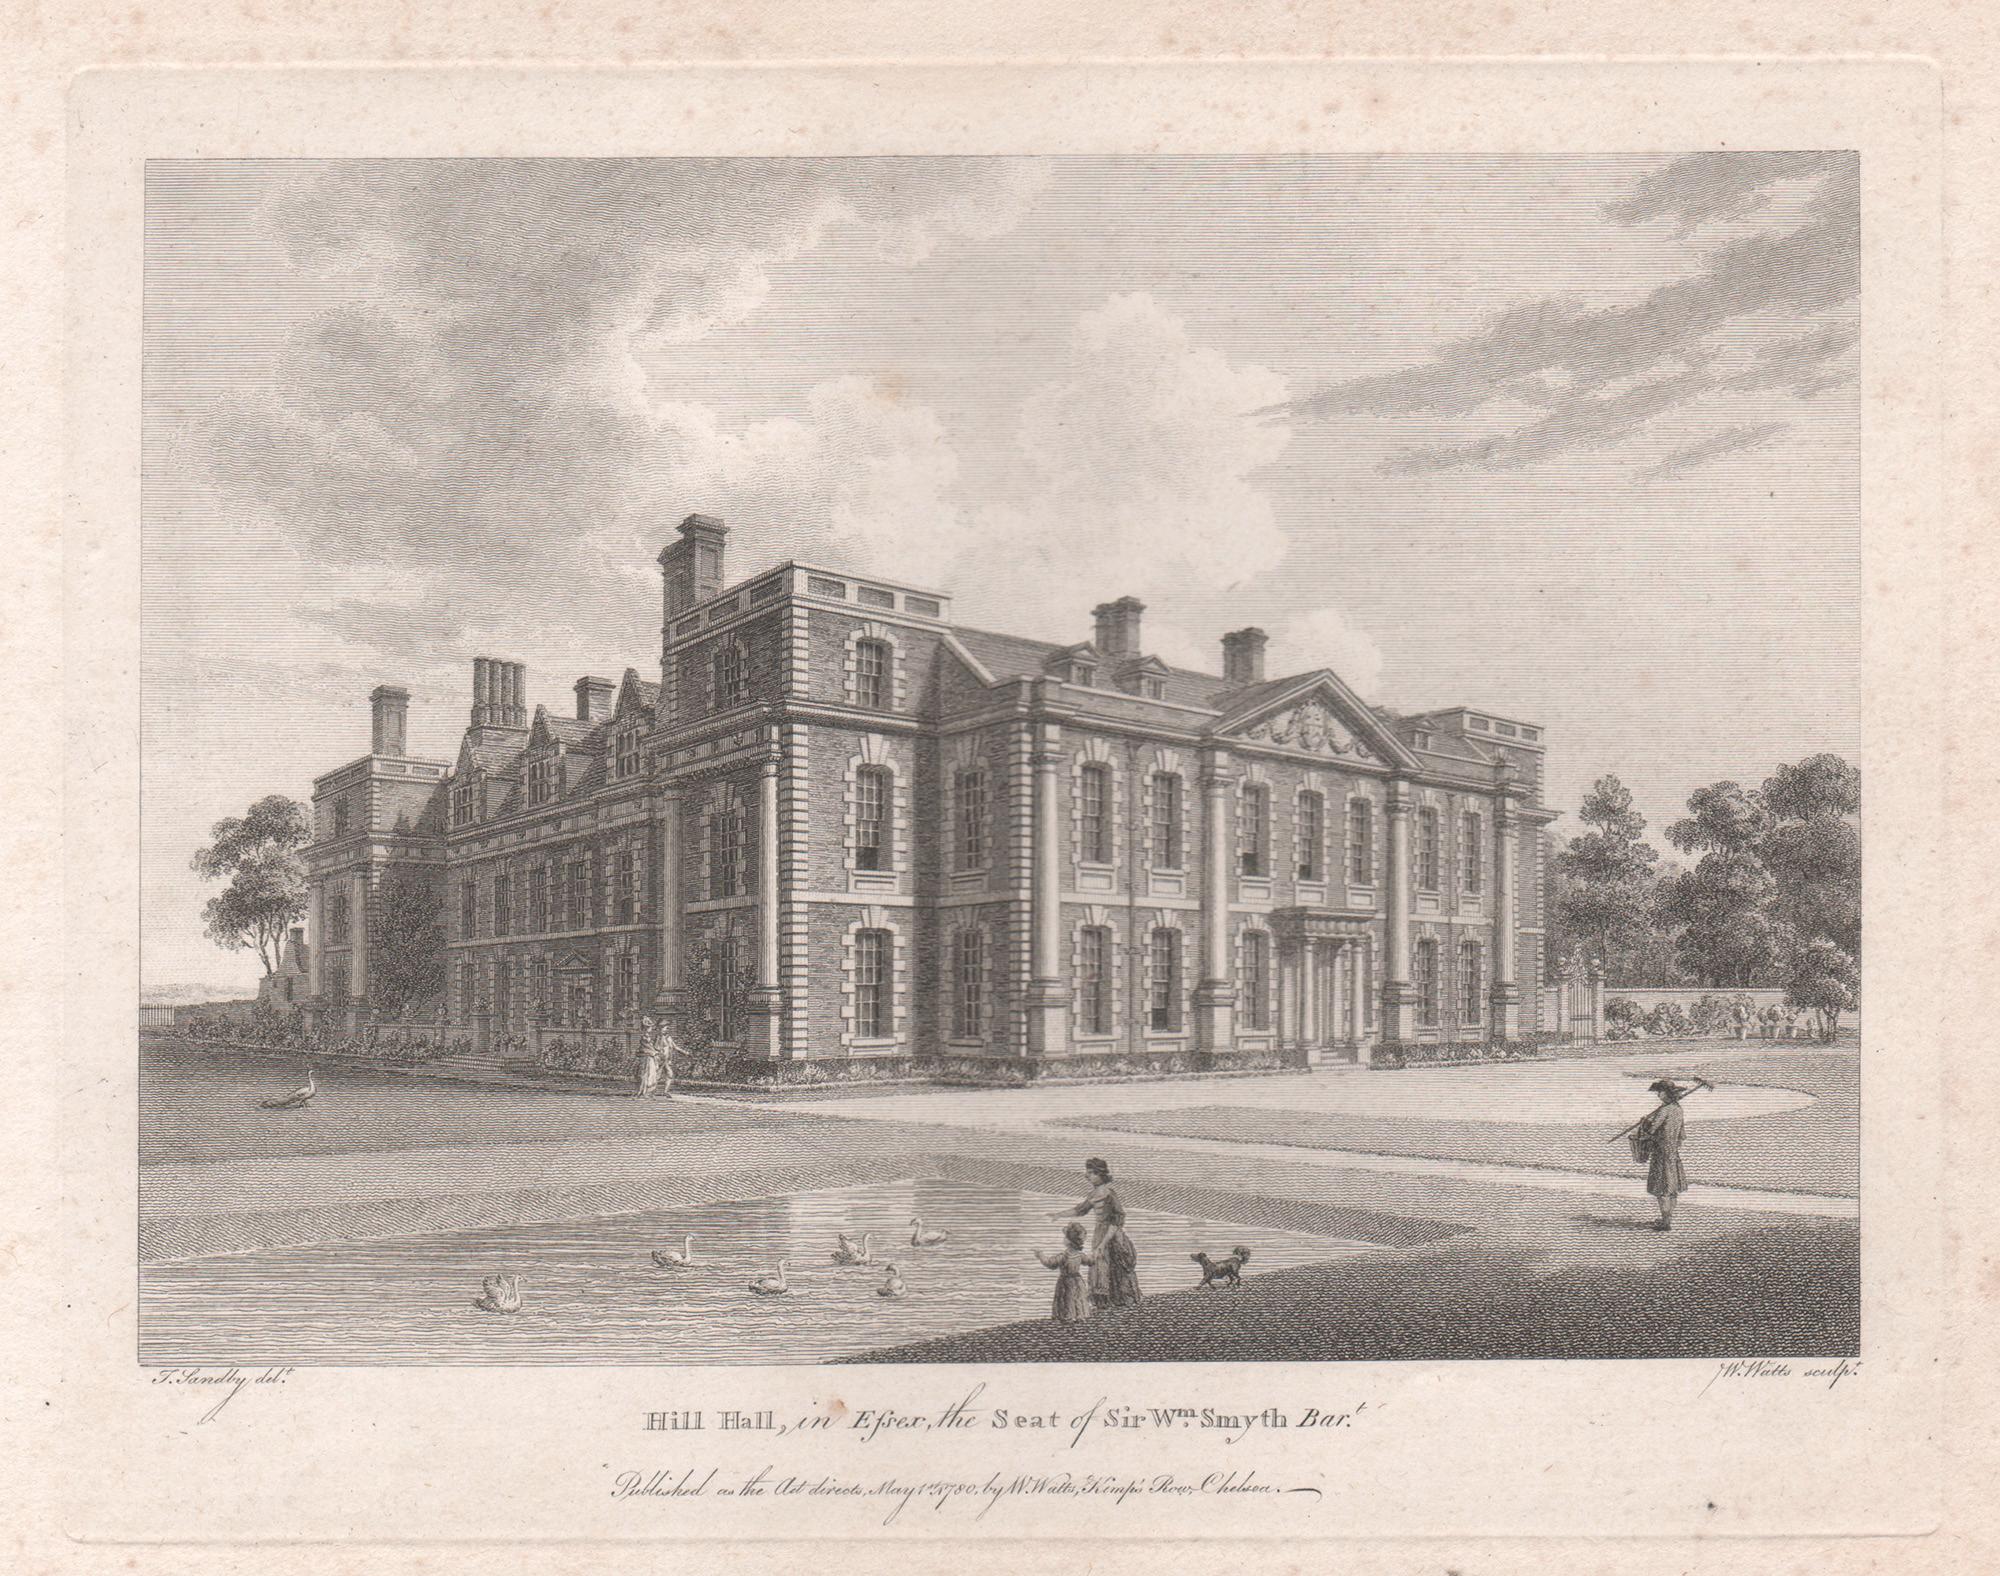 Hill Hall in Essex, 18th century English country house engraving, 1780